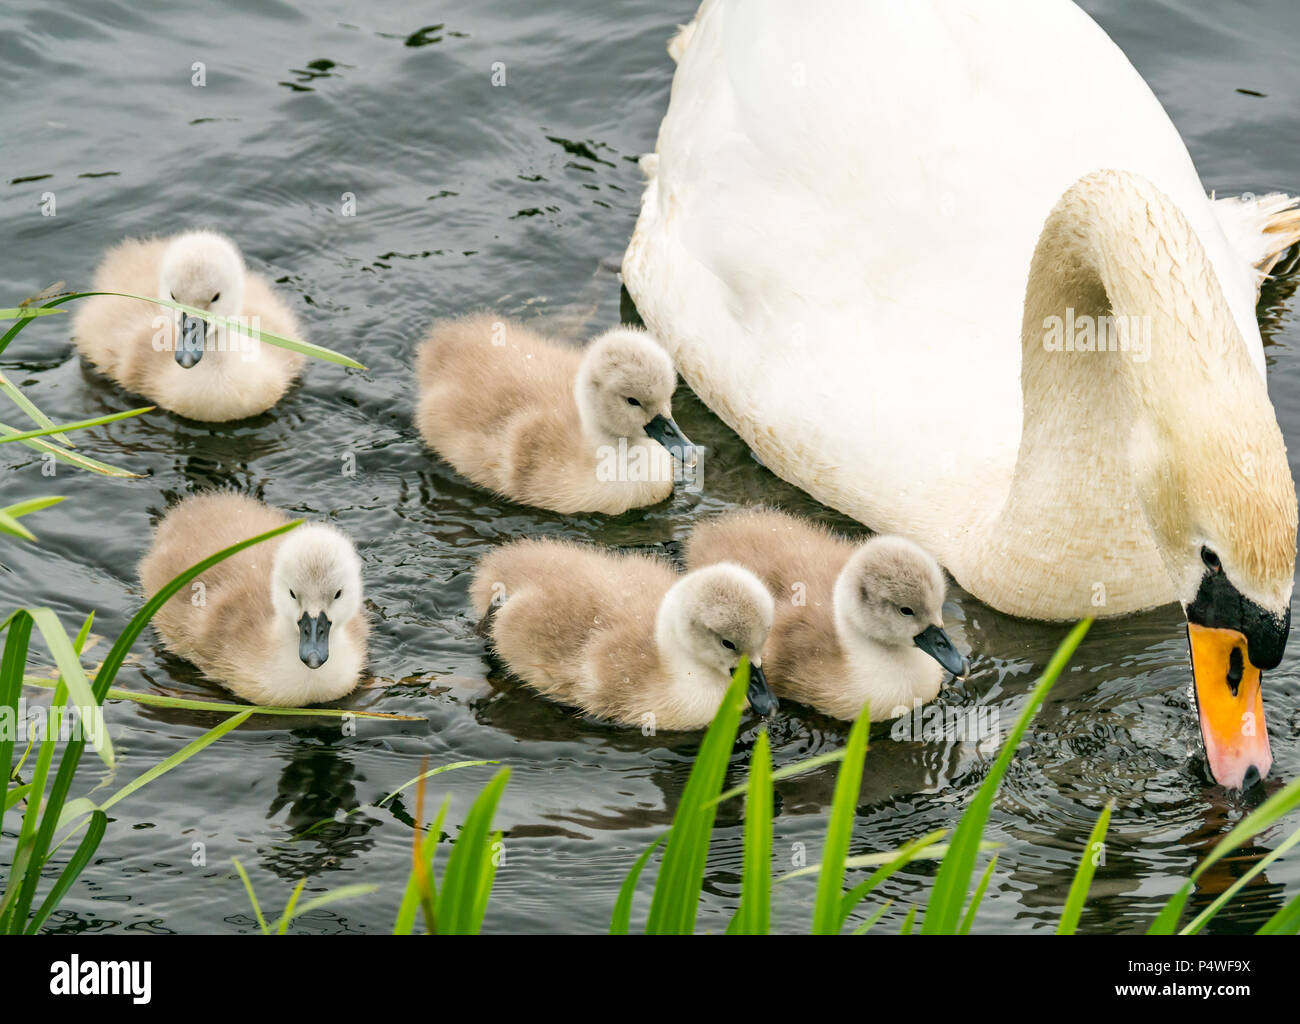 Adult mute swan, Cygnus olor, swimming in river with cygnets, Forth & Clyde canal, Falkirk, Scotland, UK Stock Photo